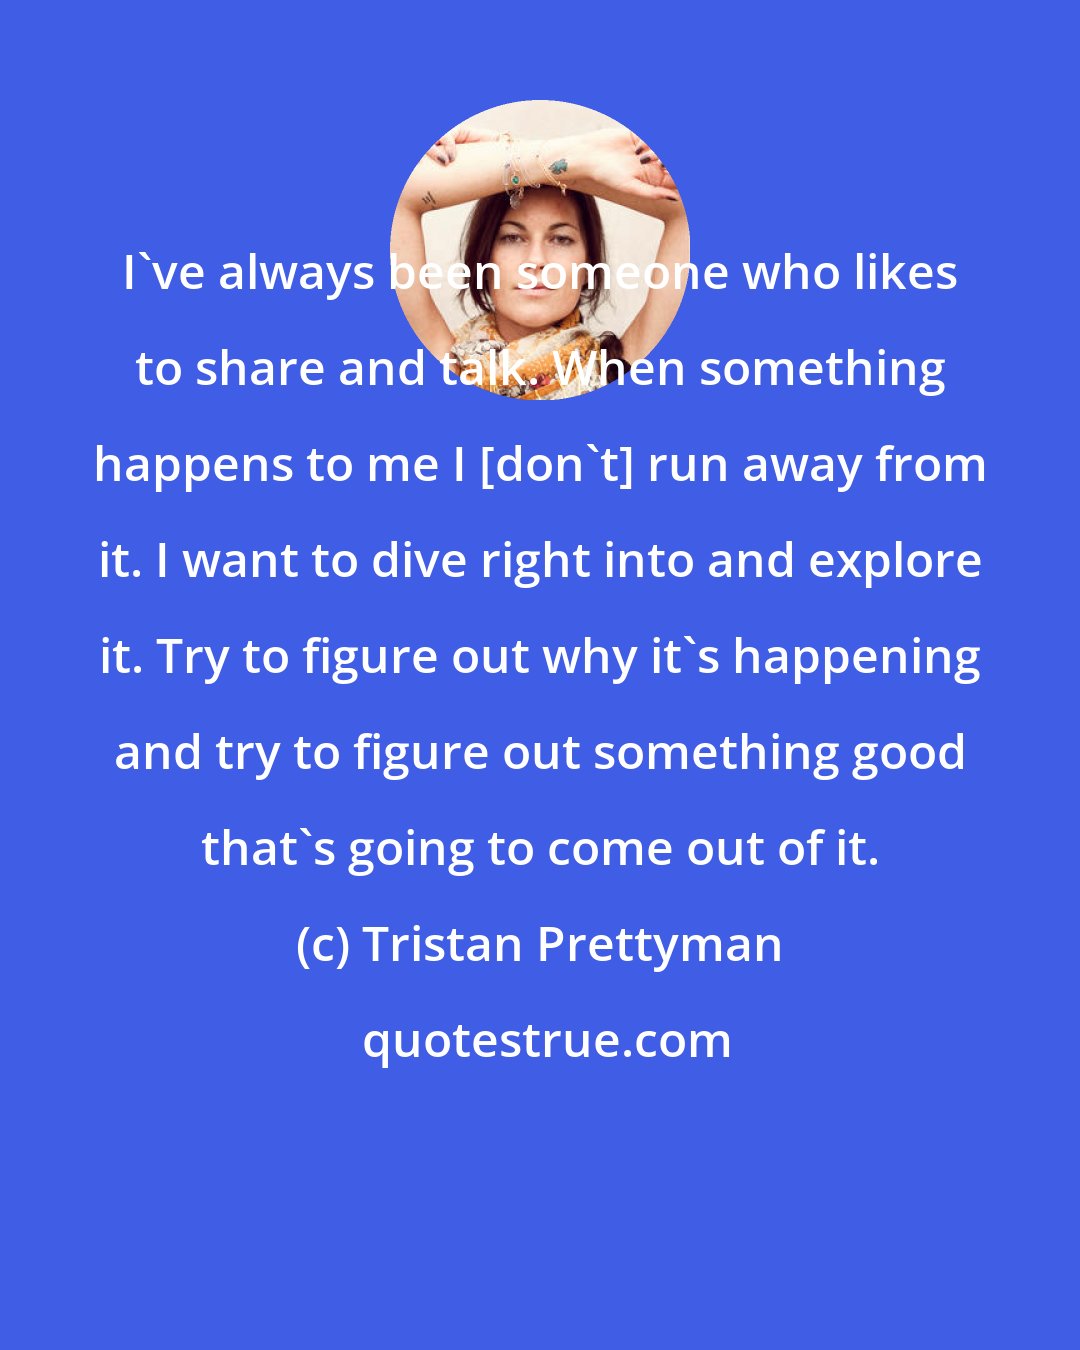 Tristan Prettyman: I've always been someone who likes to share and talk. When something happens to me I [don't] run away from it. I want to dive right into and explore it. Try to figure out why it's happening and try to figure out something good that's going to come out of it.